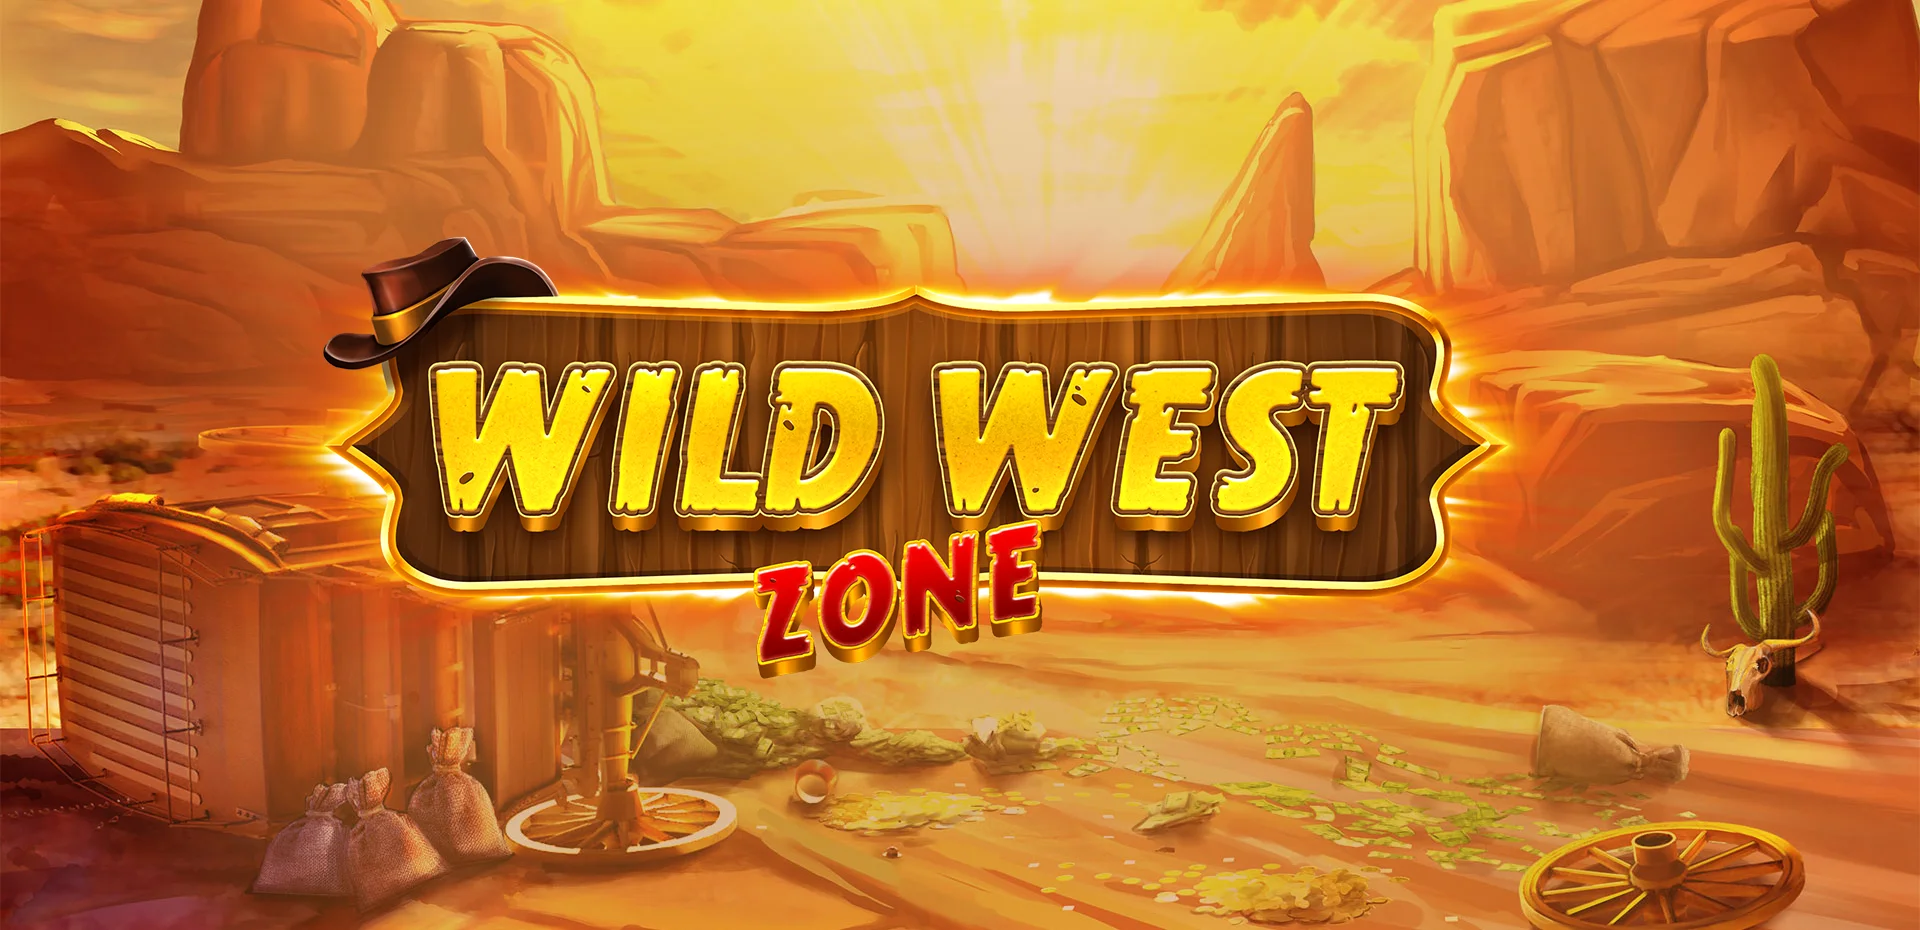 Wild West Zone Slot Review